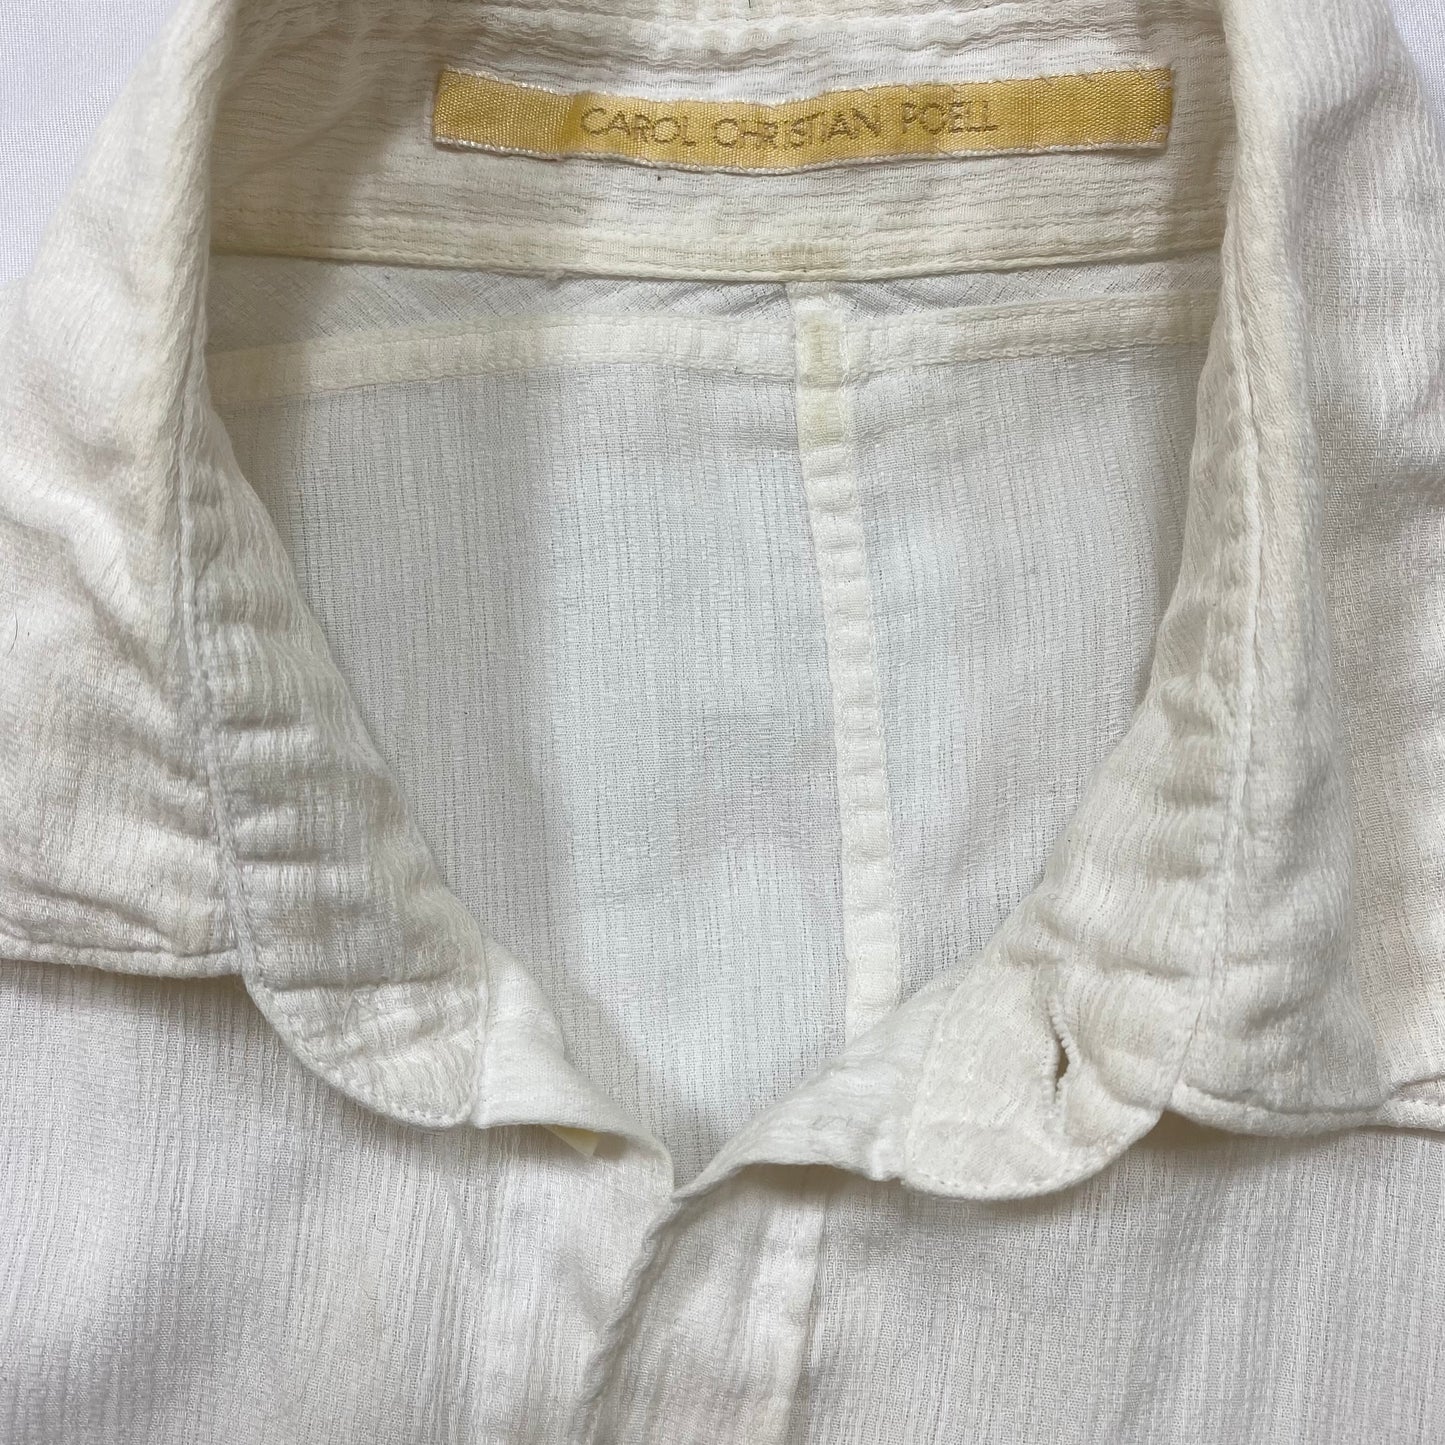 Carol Christian Poell Linen Short Sleeve Button up 46/Small